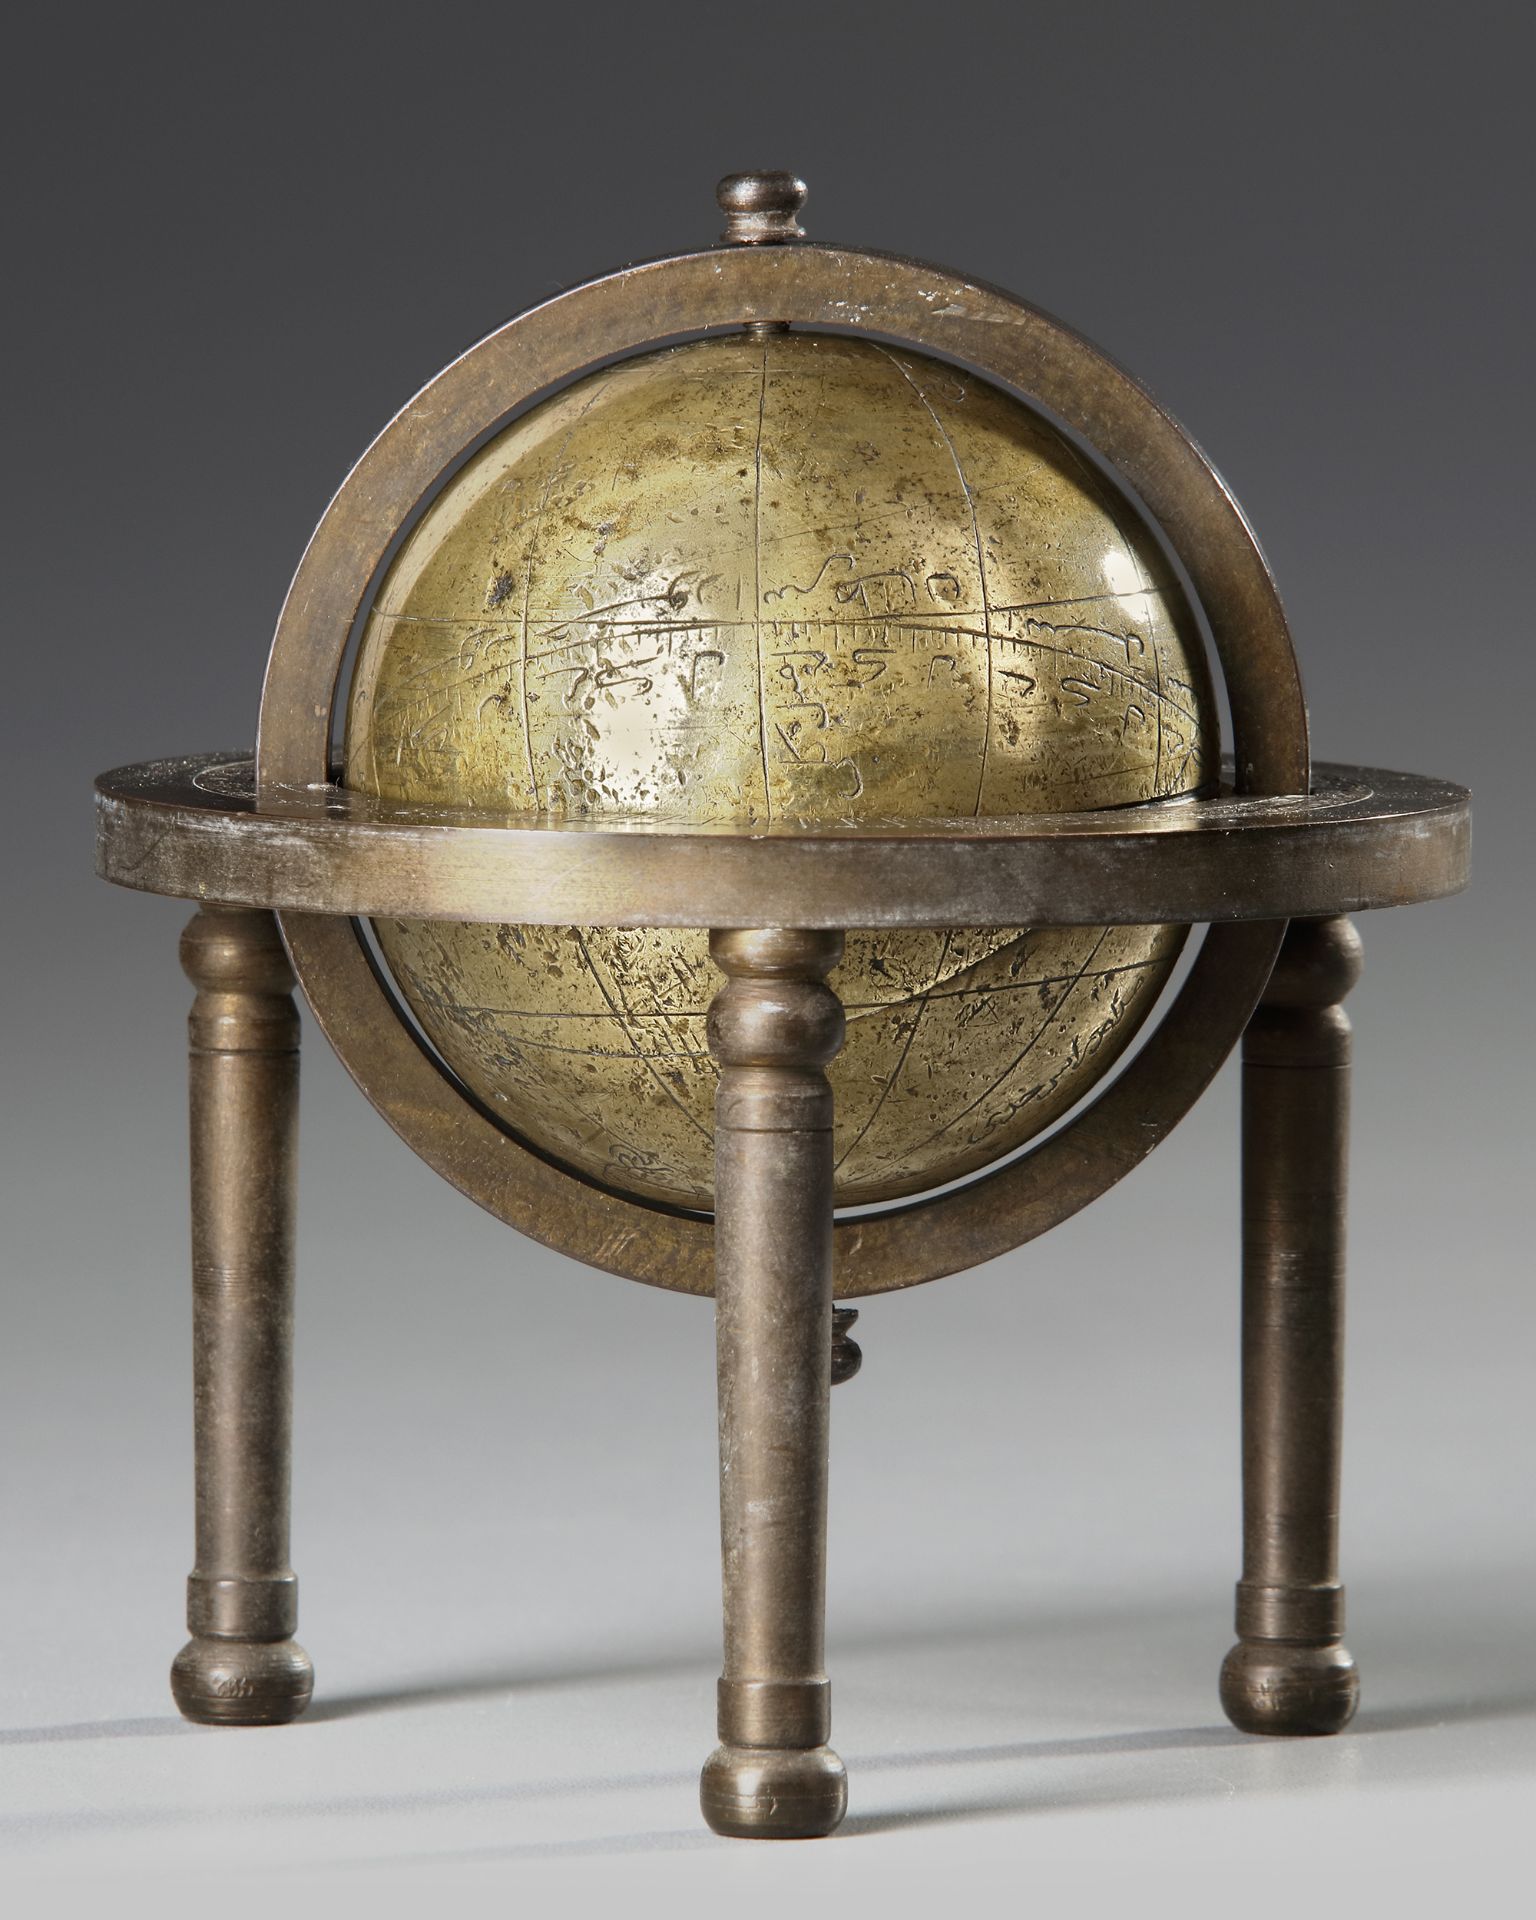 AN INDO-PERSIAN BRASS EASTERN ISLAMIC CELESTIAL GLOBE, INDO-PERSIAN LATE 17TH-EARLY 18TH CENTURY